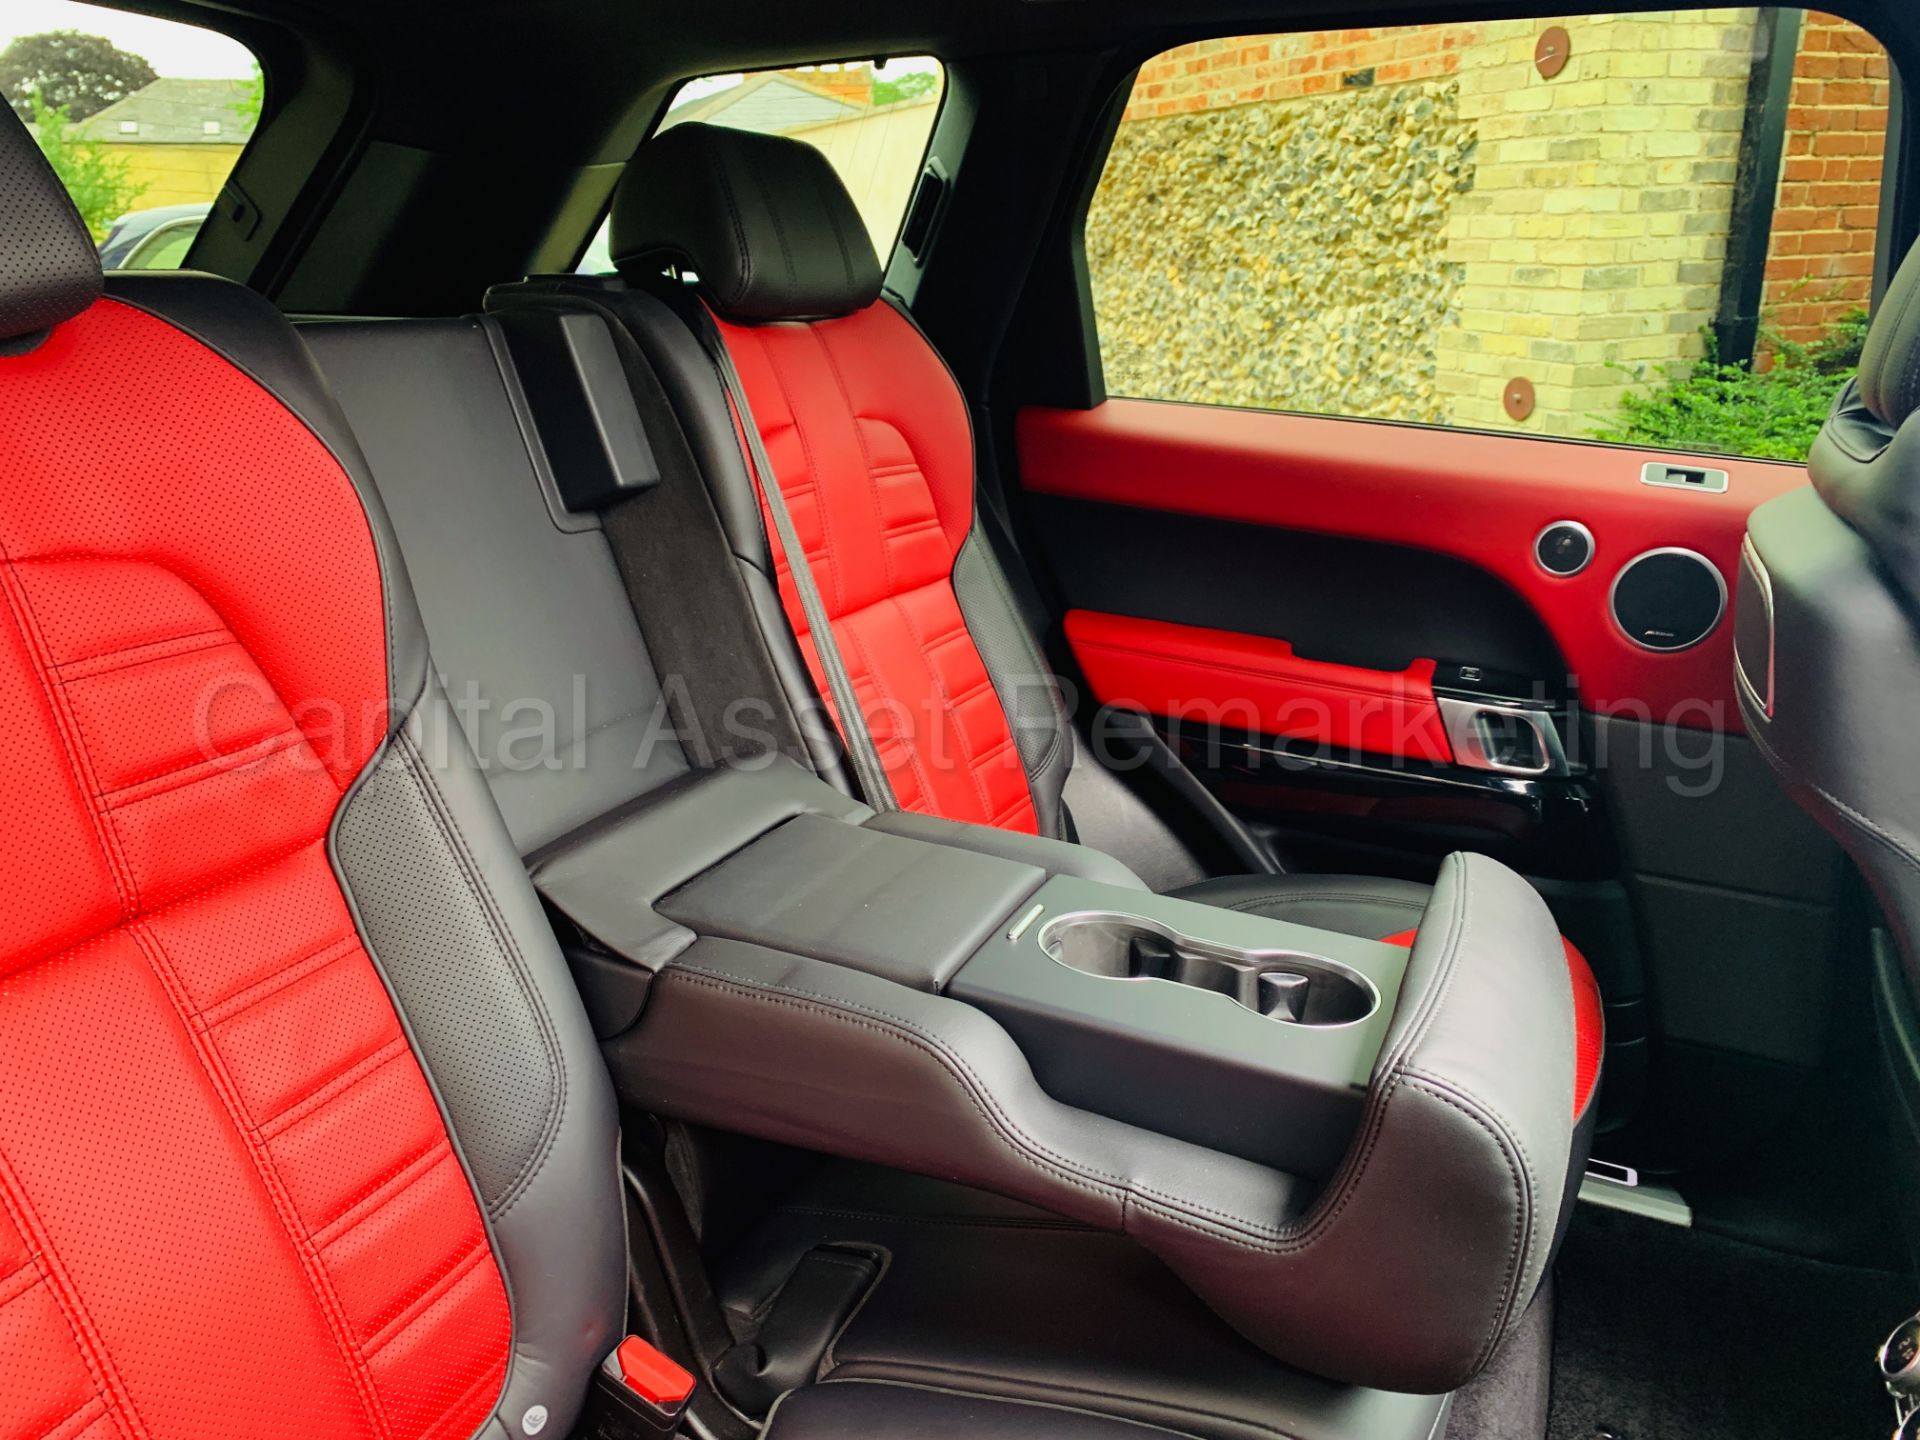 (On Sale) RANGE ROVER SPORT *AUTOBIOGRAPHY DYNAMIC* (2015) '4.4 SDV8 8 SPEED AUTO' **ULTIMATE SPEC** - Image 45 of 83